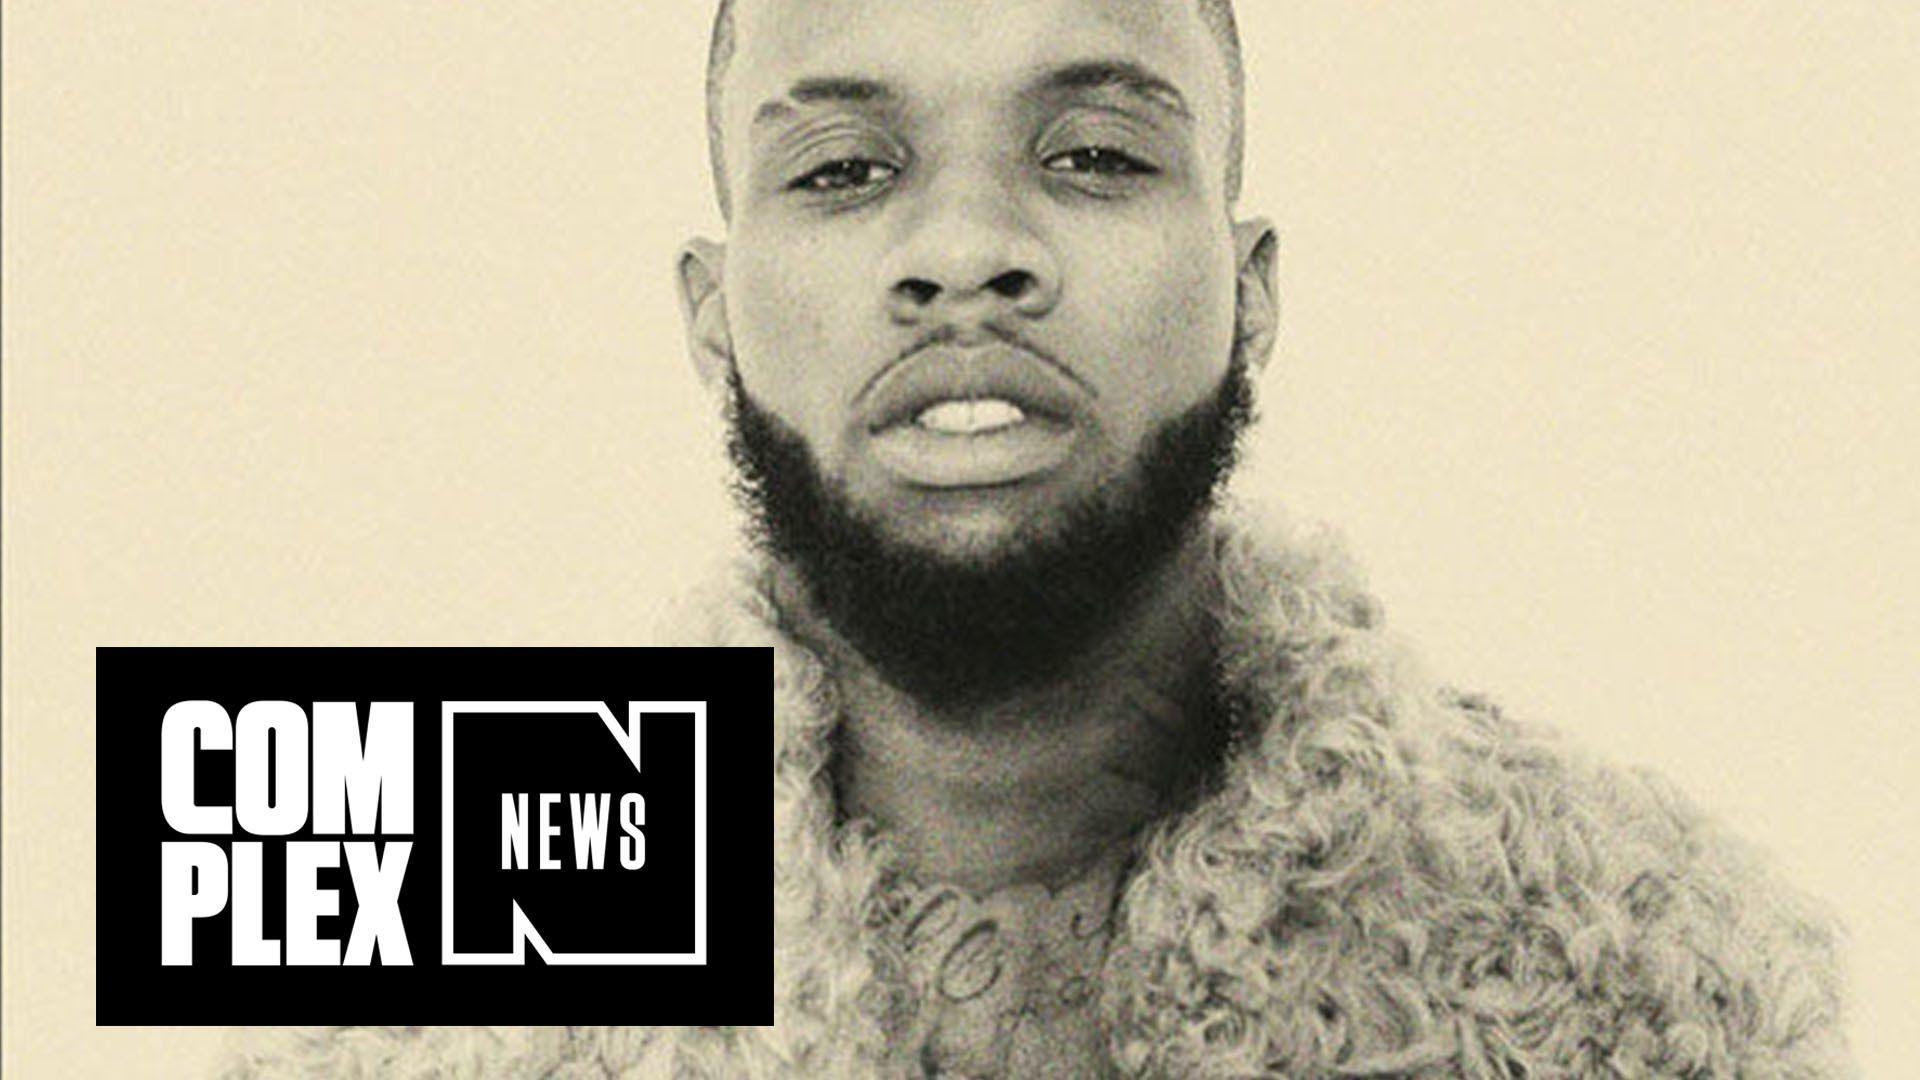 Tory Lanez' Debut Album 'I Told You' Has Arrived